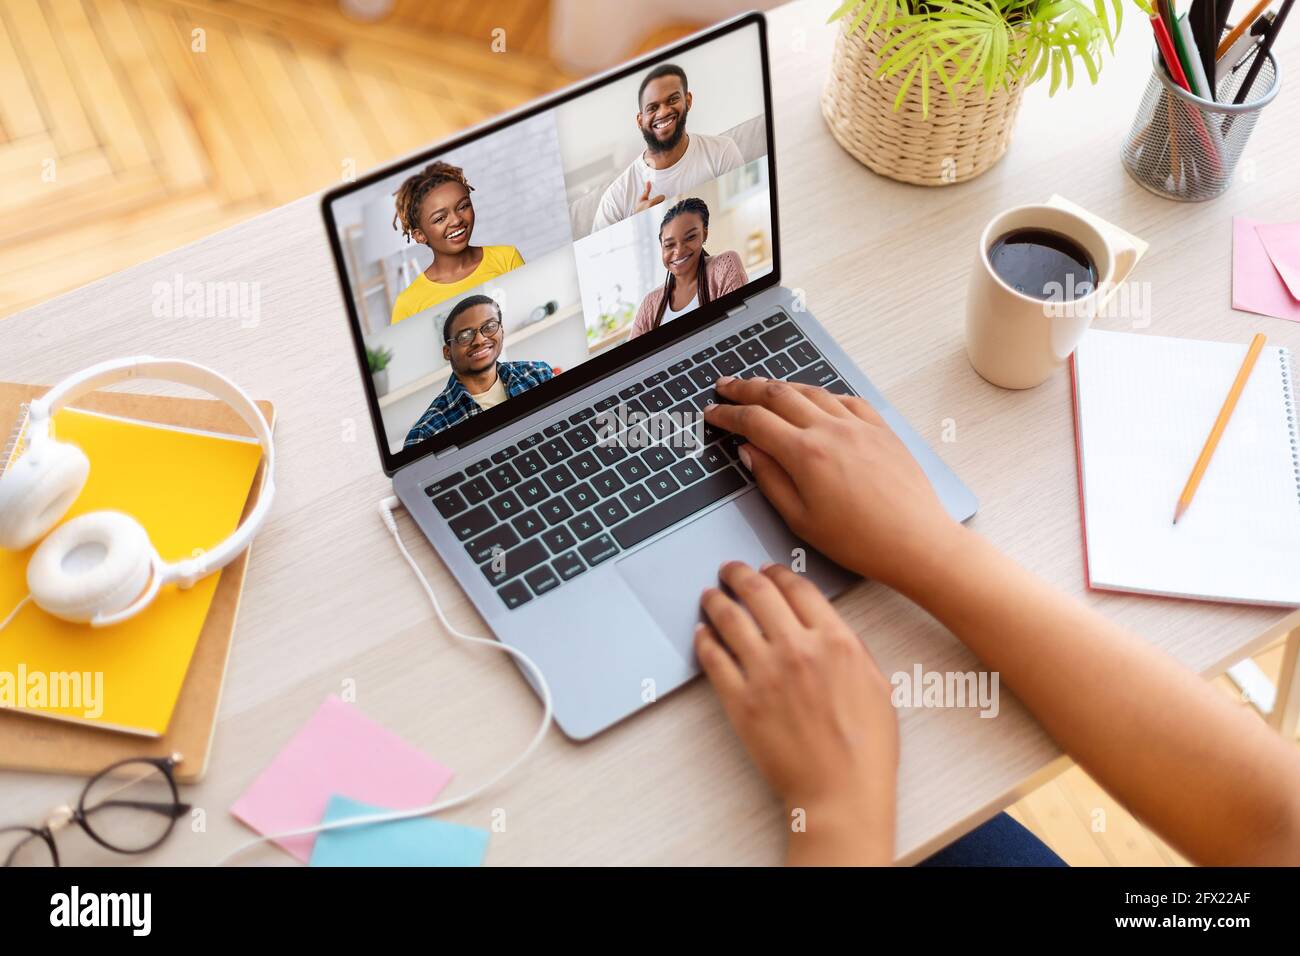 Covid-19 lockdown, social distance, remote online meeting with friends, colleagues Stock Photo